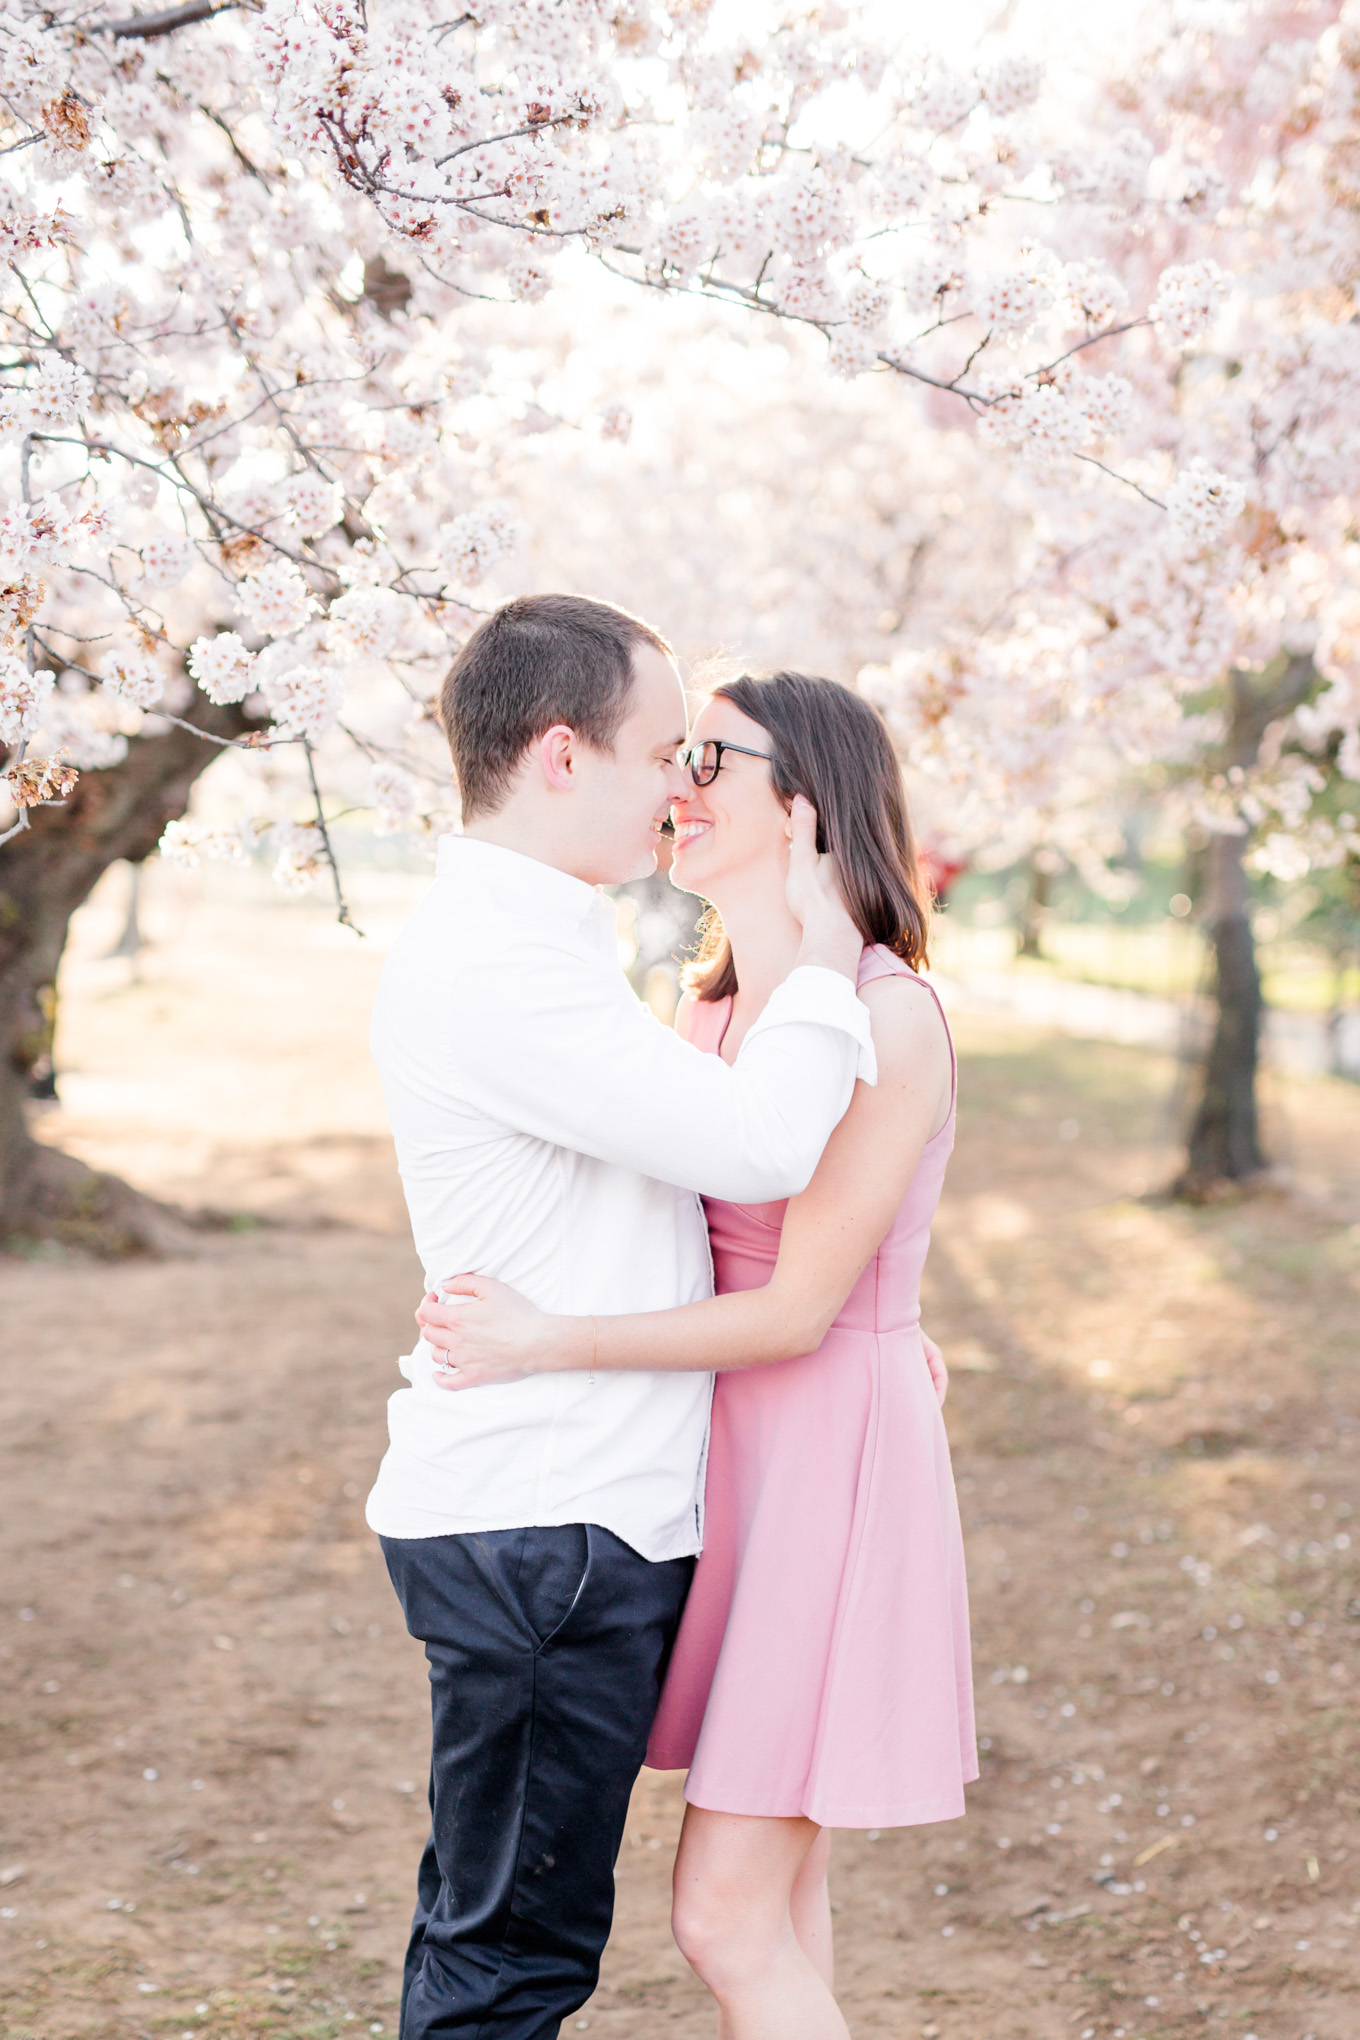 sunny cherry blossoms engagement session, Washington, D.C. engagement photos, Washington D.C. engagement photos, sunrrise engagement photos, cherry blossom engagement photos, D.C. cherry bloossoms, D.C. cherry blossoms photos, cherry blossom photos, cherry blossoms portrraits, sunny engagement photos, classic engagement photos, Rachel E.H. Photography, engagement session style, cherry blossoms forest